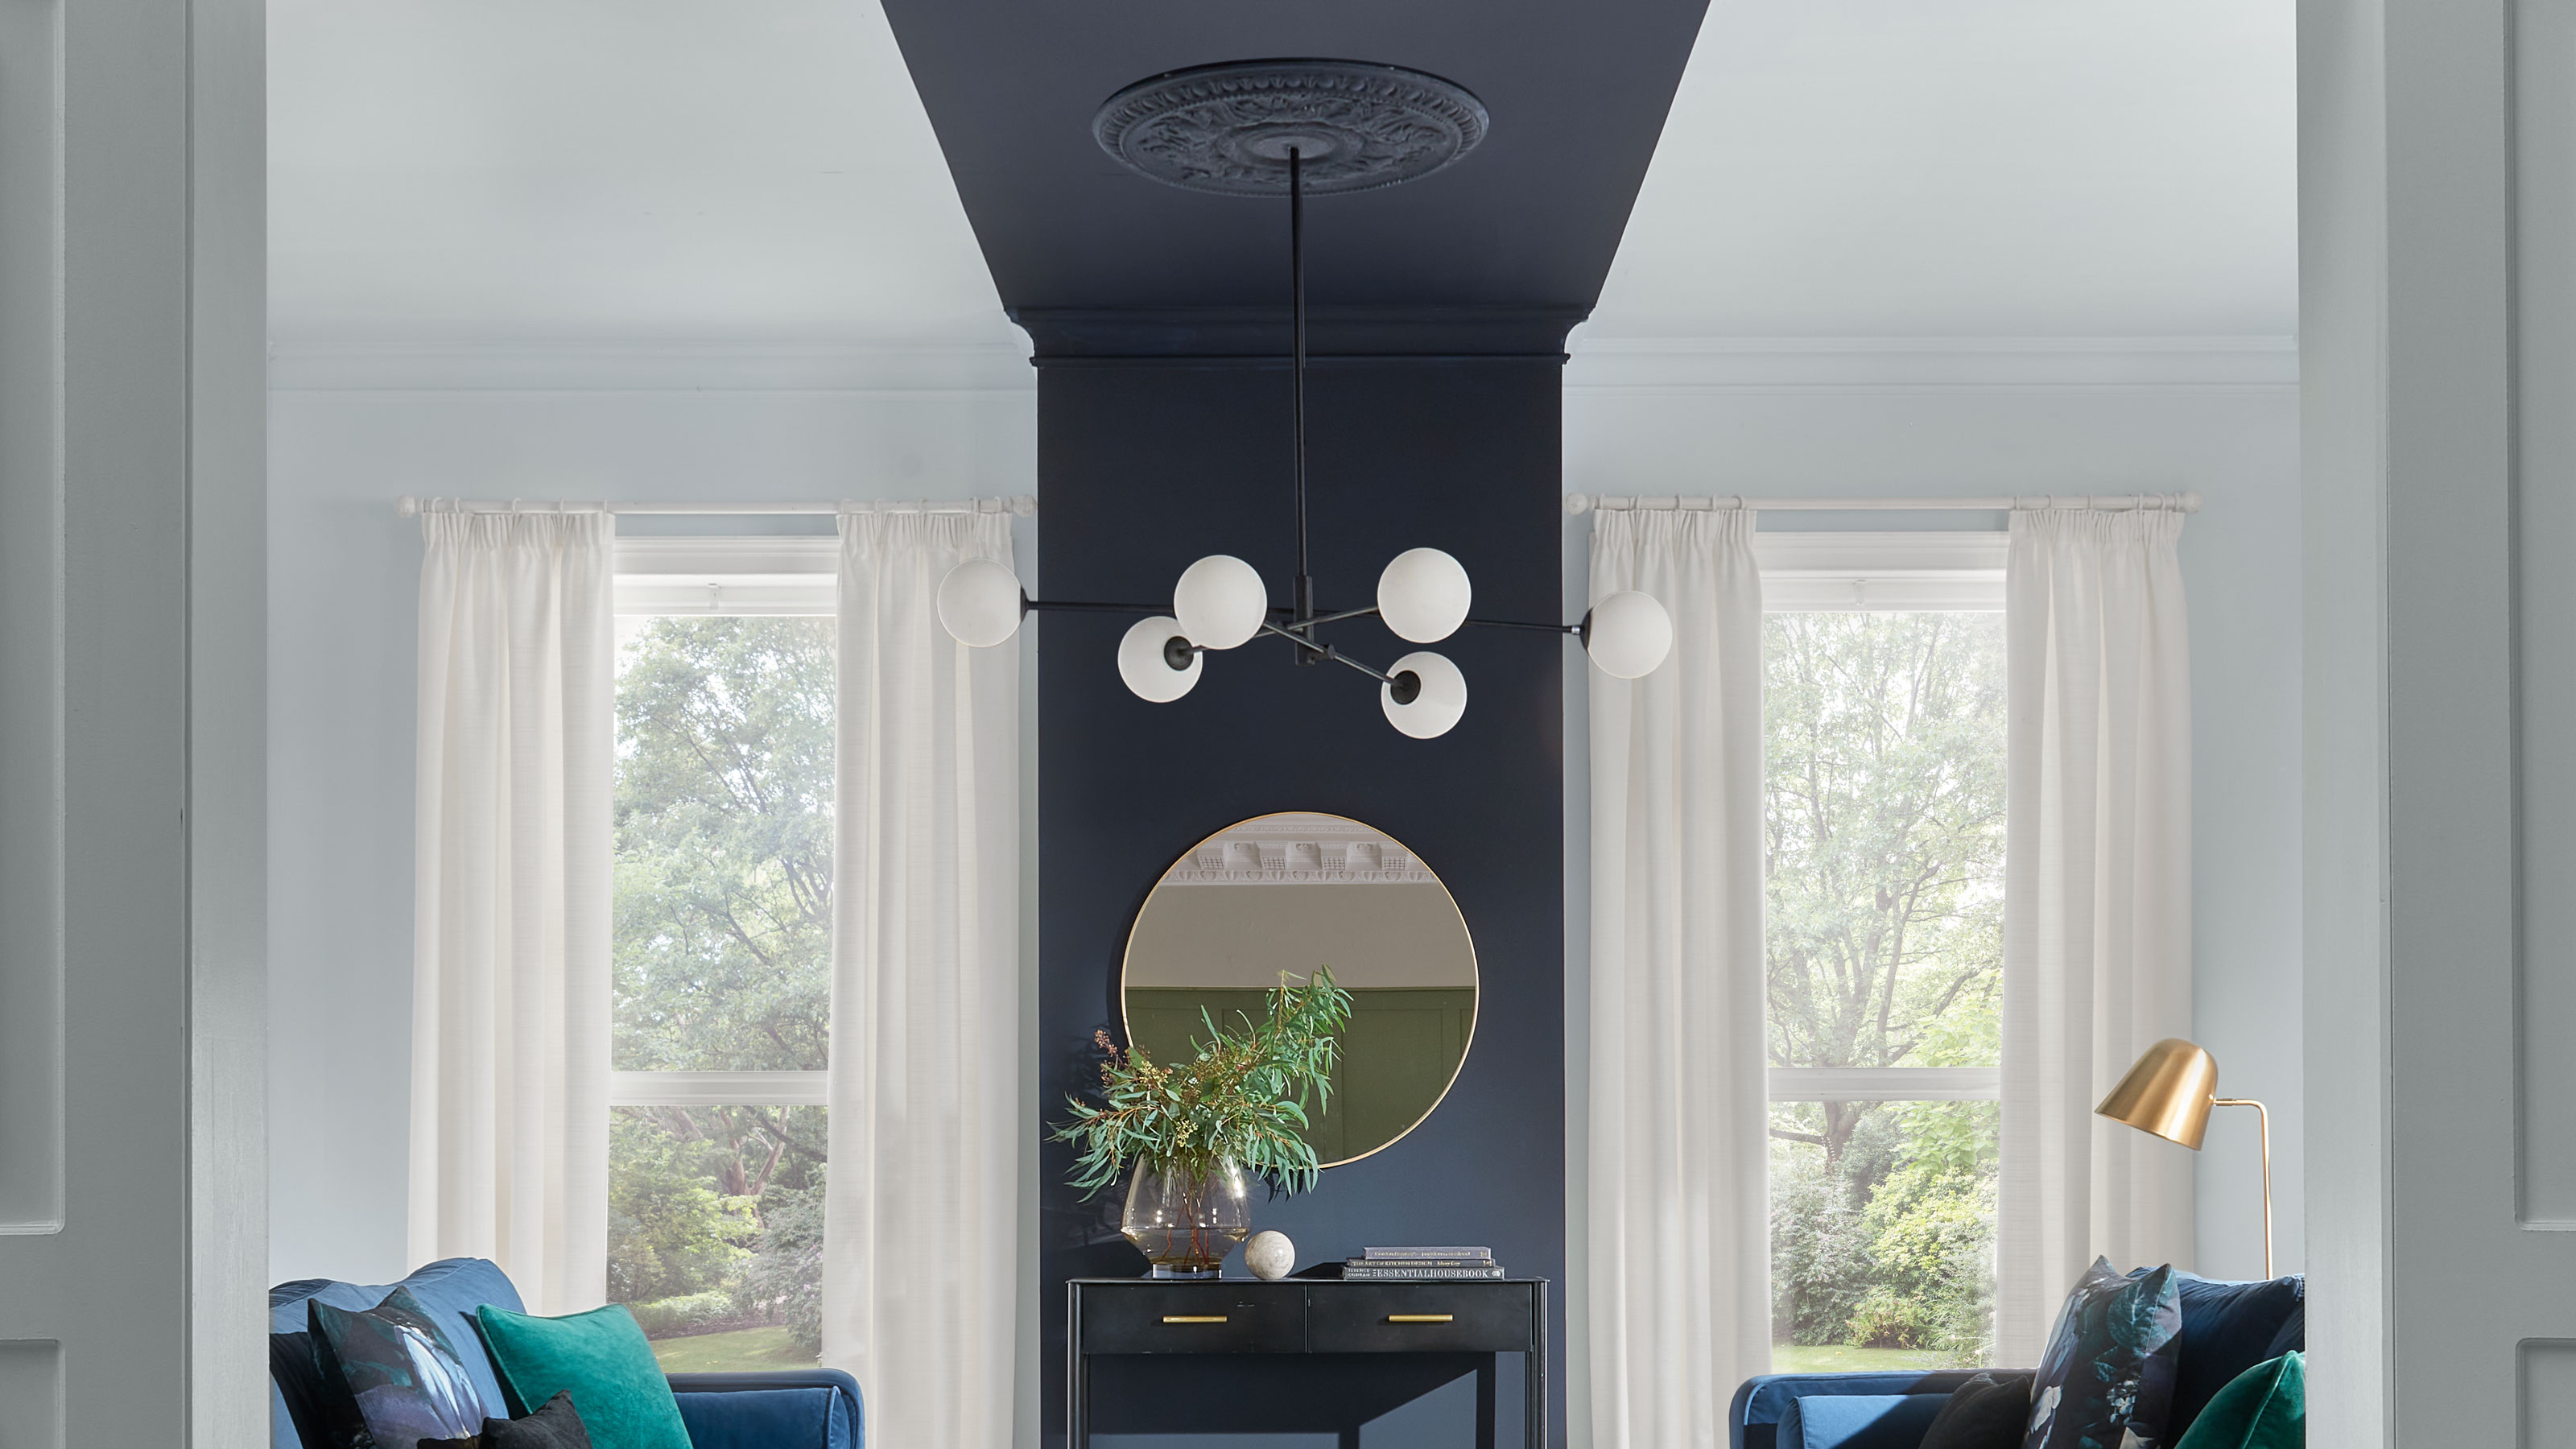 Take the plunge - decorate with navy blue